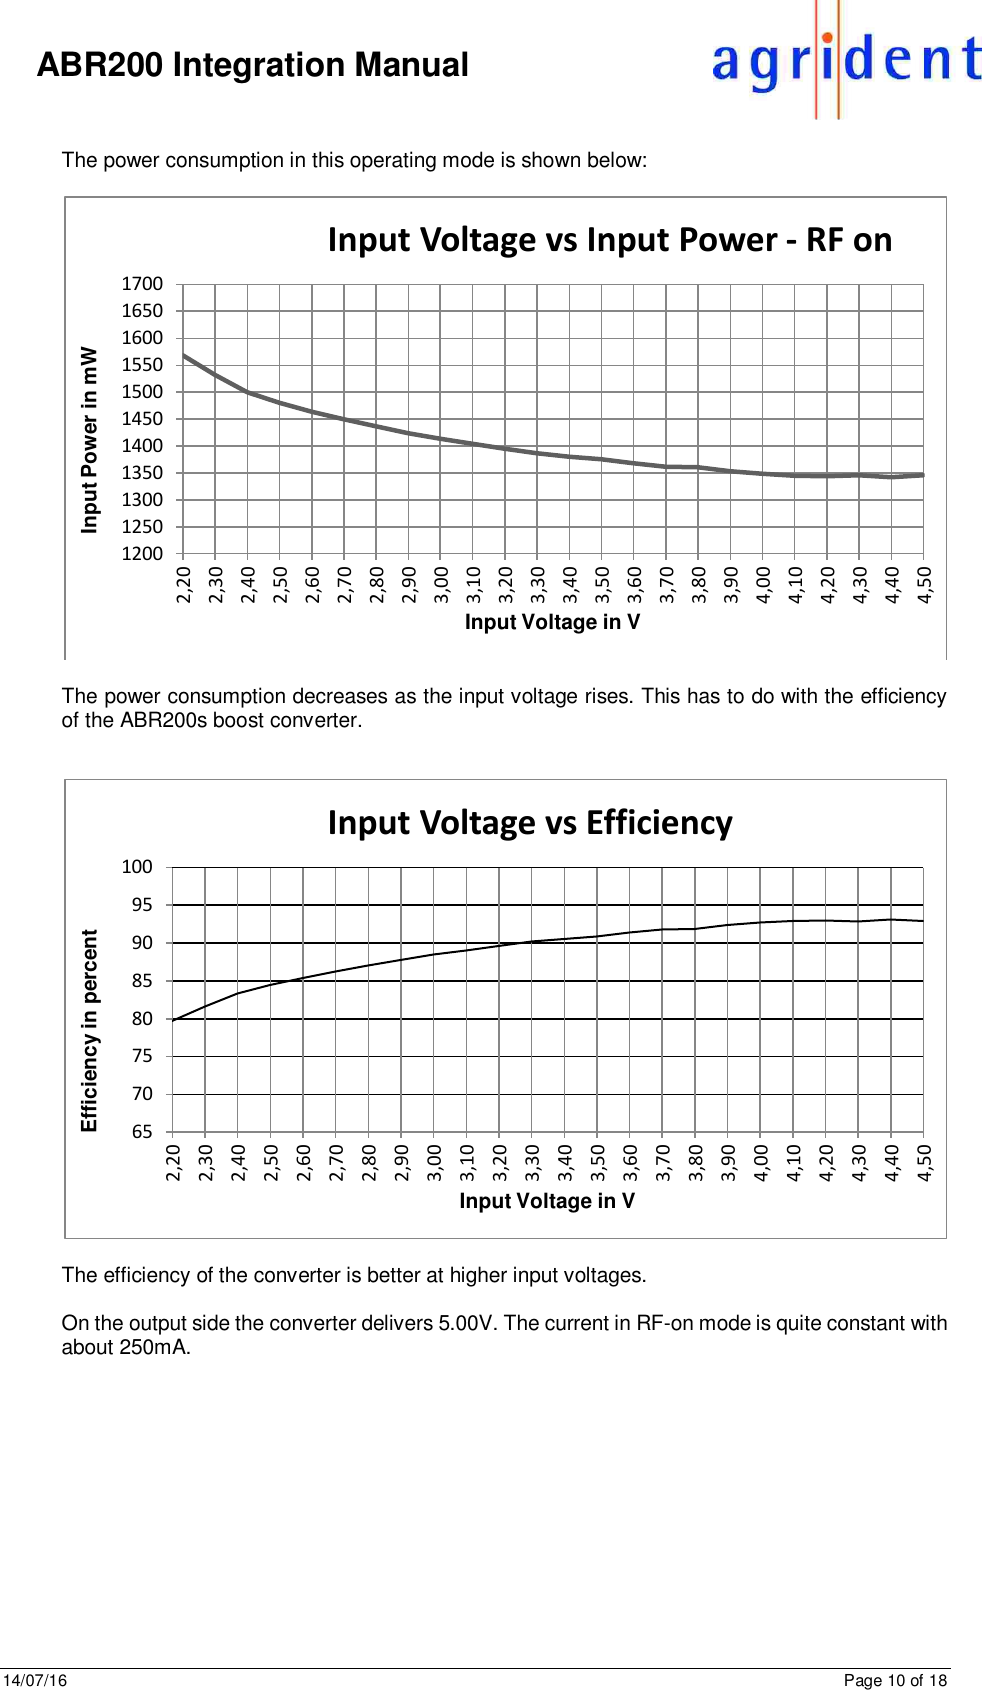 14/07/16      Page 10 of 18      ABR200 Integration Manual  The power consumption in this operating mode is shown below:    The power consumption decreases as the input voltage rises. This has to do with the efficiency of the ABR200s boost converter.     The efficiency of the converter is better at higher input voltages.  On the output side the converter delivers 5.00V. The current in RF-on mode is quite constant with about 250mA.    120012501300135014001450150015501600165017002,202,302,402,502,602,702,802,903,003,103,203,303,403,503,603,703,803,904,004,104,204,304,404,50Input Power in mWInput Voltage in VInput Voltage vs Input Power - RF on657075808590951002,202,302,402,502,602,702,802,903,003,103,203,303,403,503,603,703,803,904,004,104,204,304,404,50Efficiency in percentInput Voltage in VInput Voltage vs Efficiency